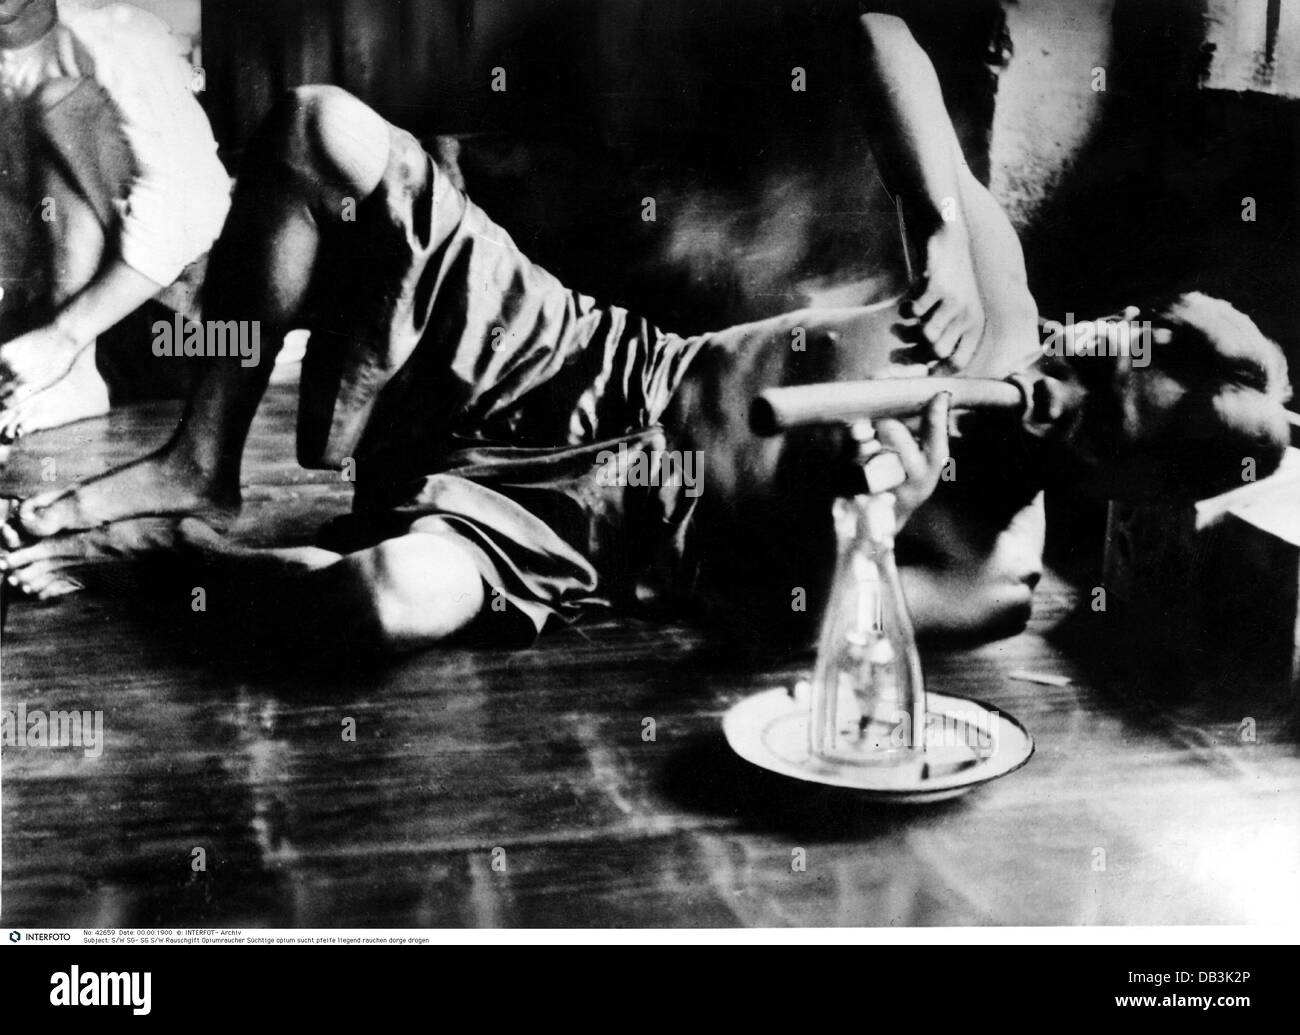 drugs and dope, opium, junkie smoking opium pipe, 20th century, historic, historical, addiction, lying, drug, drugs, bamboo, addicted, man, addict, addicts, 1960s, people, men, male, Additional-Rights-Clearences-Not Available Stock Photo